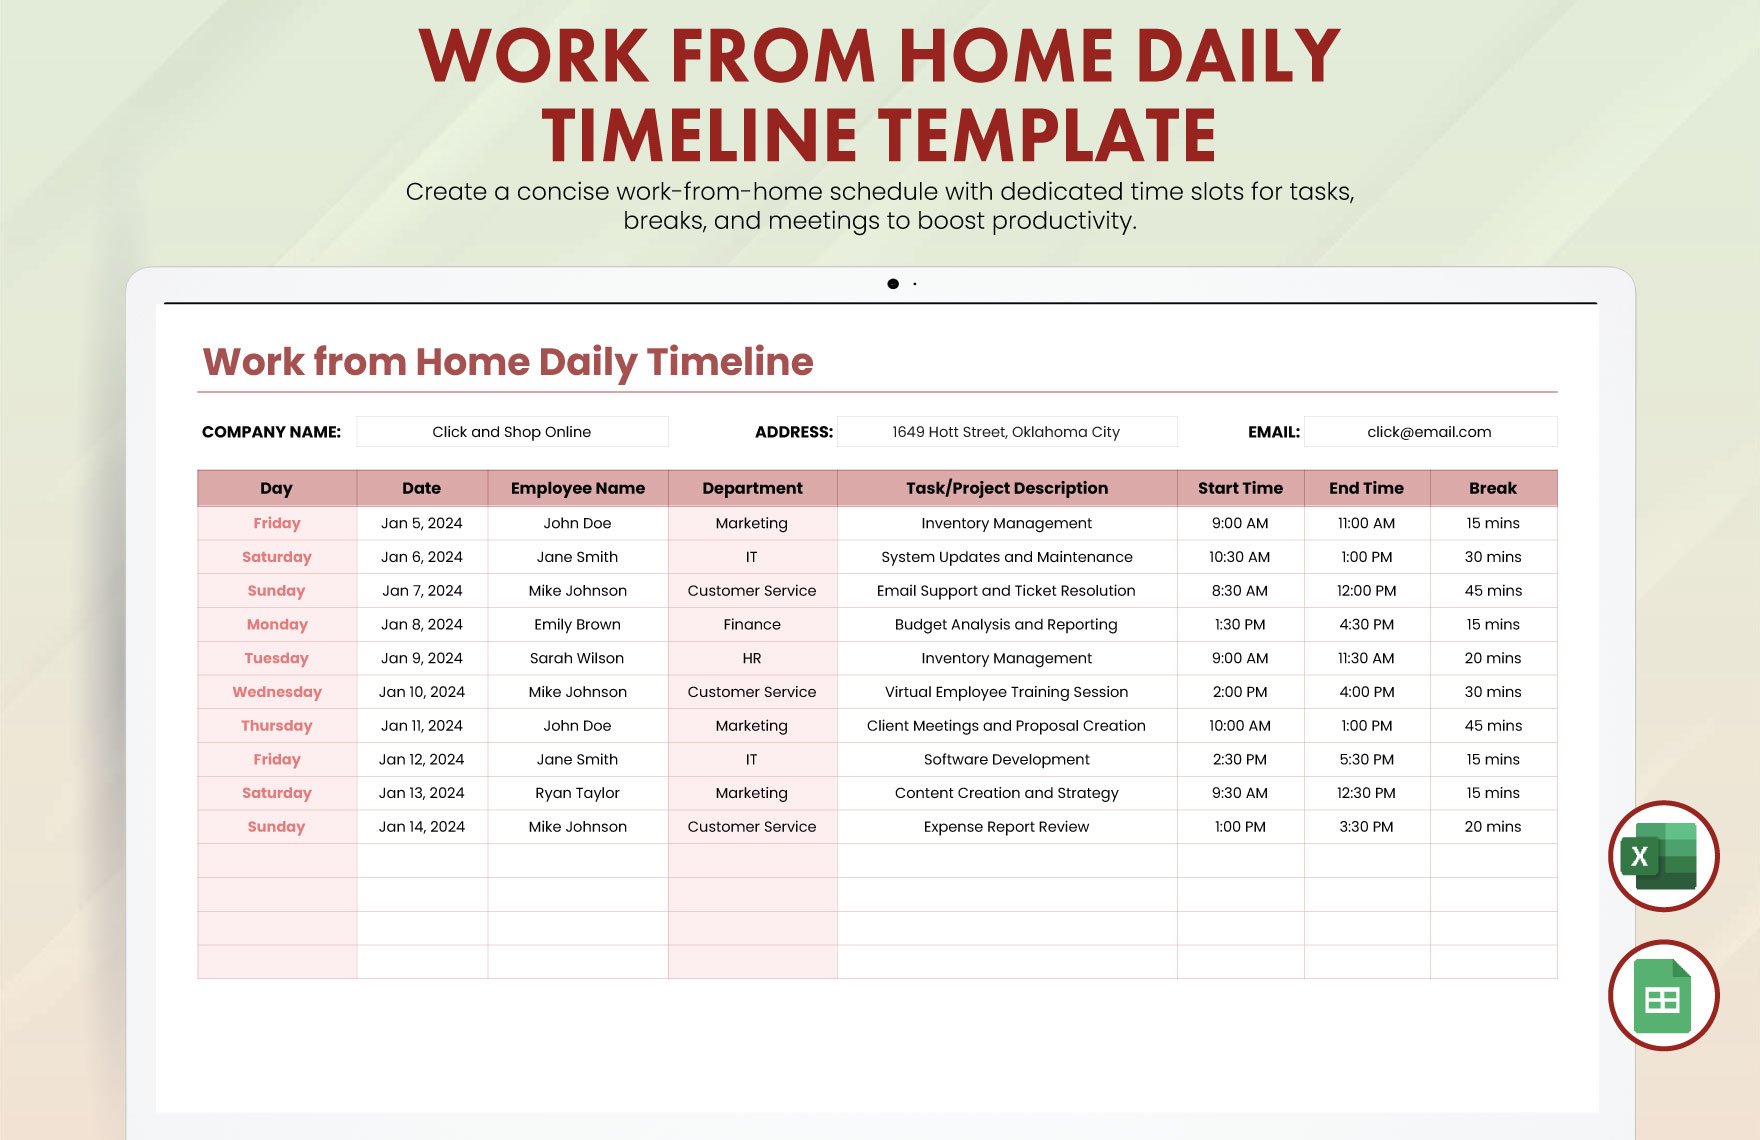 Work from Home Daily Timeline Template